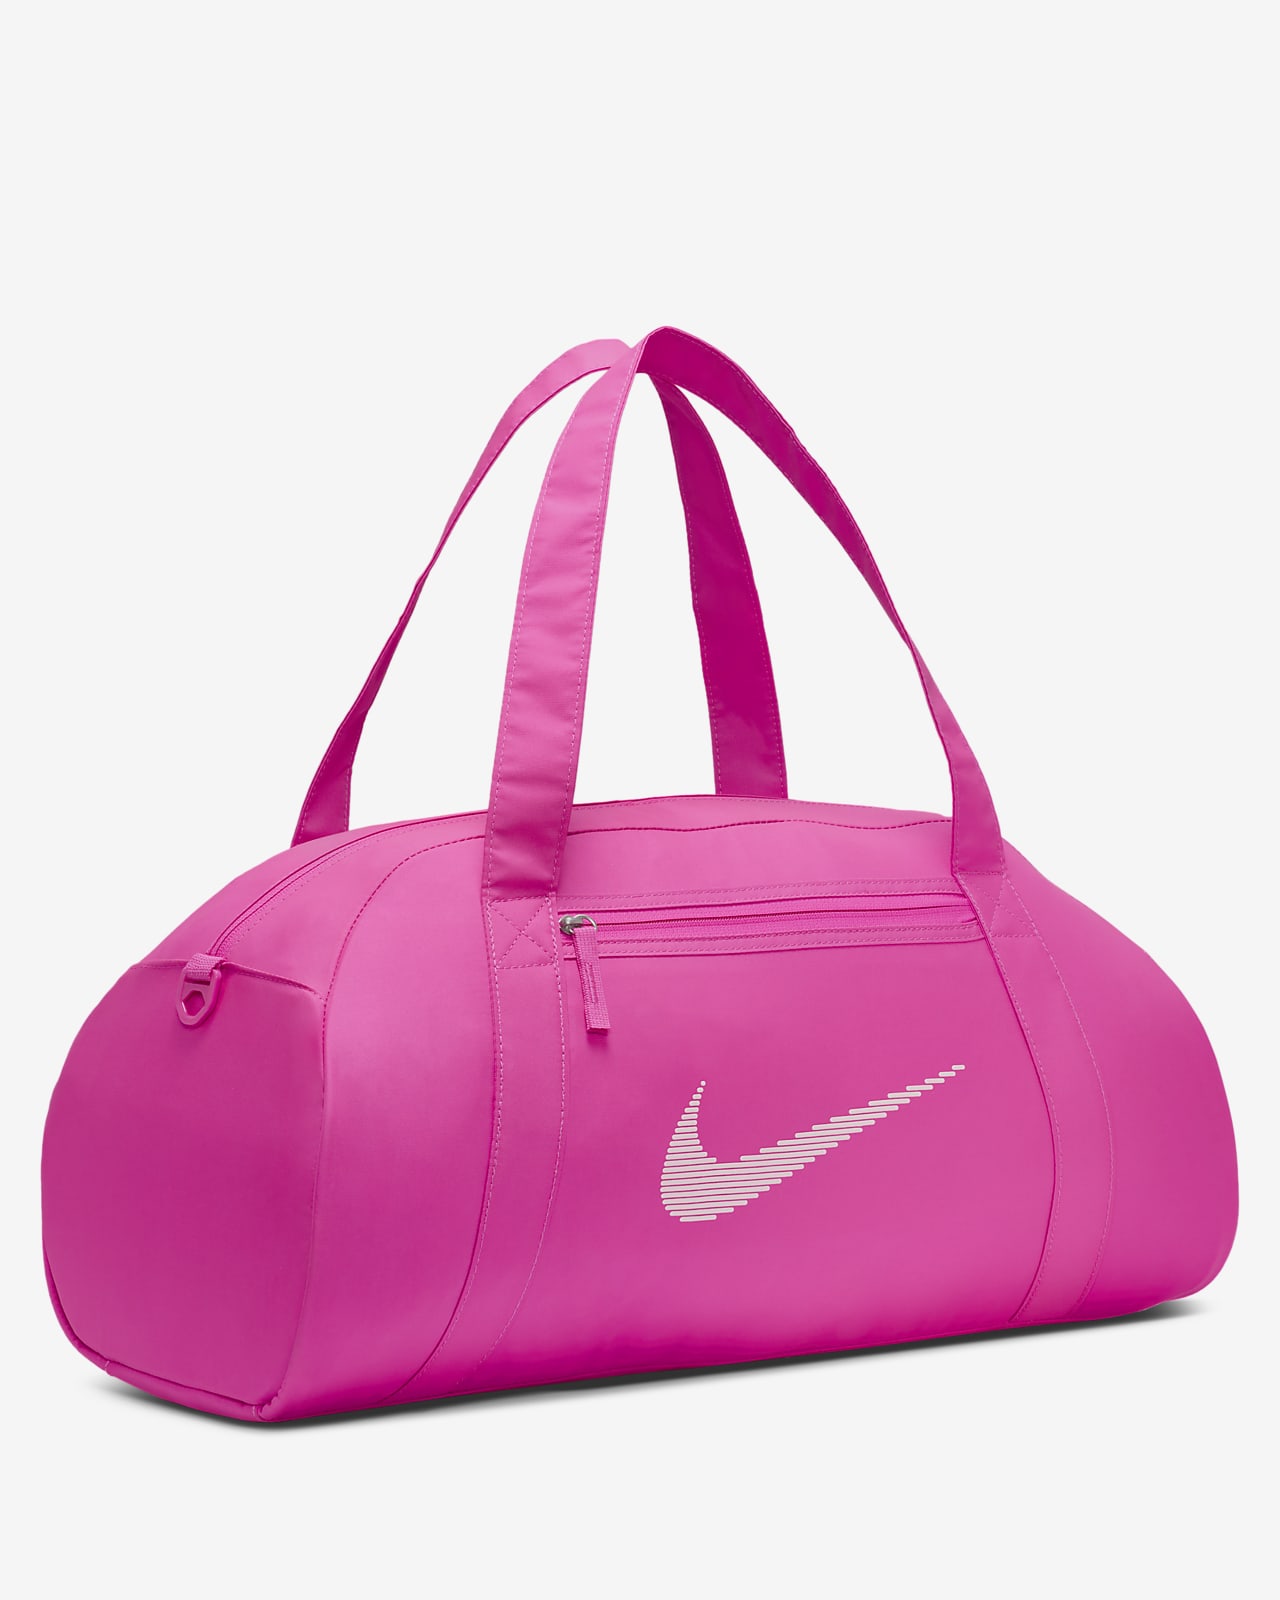 Shoe Pink Bag for Gym Bag for Women Girls Pink Workout Duffel Bag Shoe  Compartment at Rs 525 | Inder Puri | New Delhi | ID: 21840534530